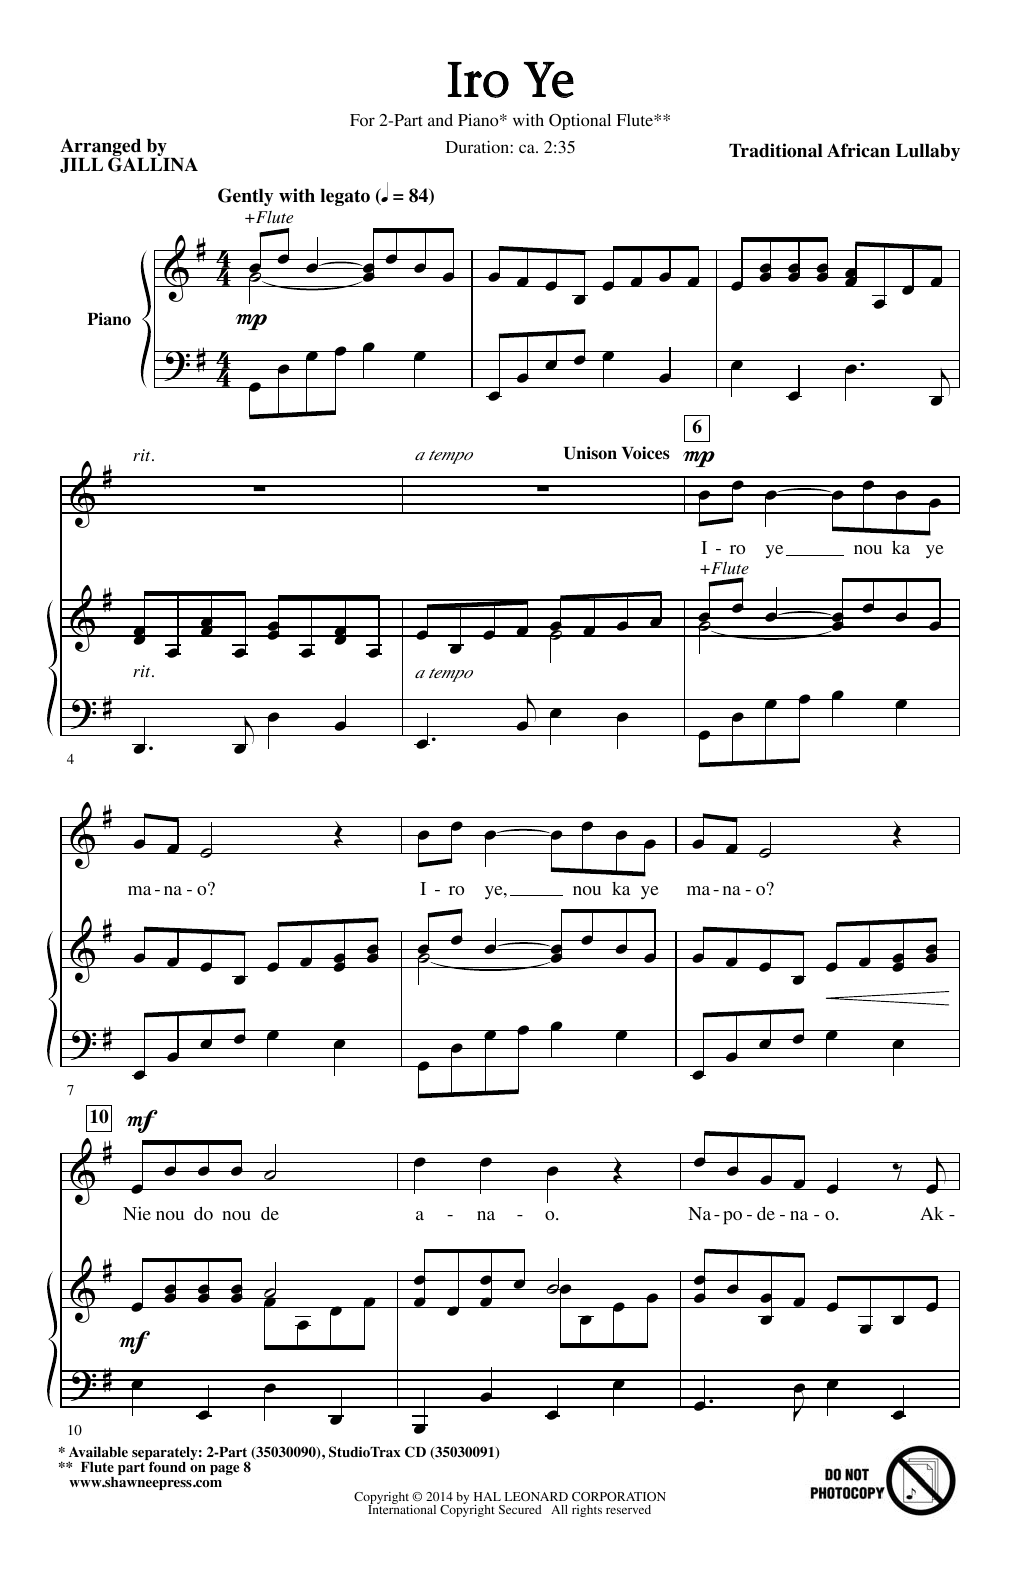 Traditional African Lullaby Iro Ye (arr. Jill Gallina) sheet music notes and chords. Download Printable PDF.